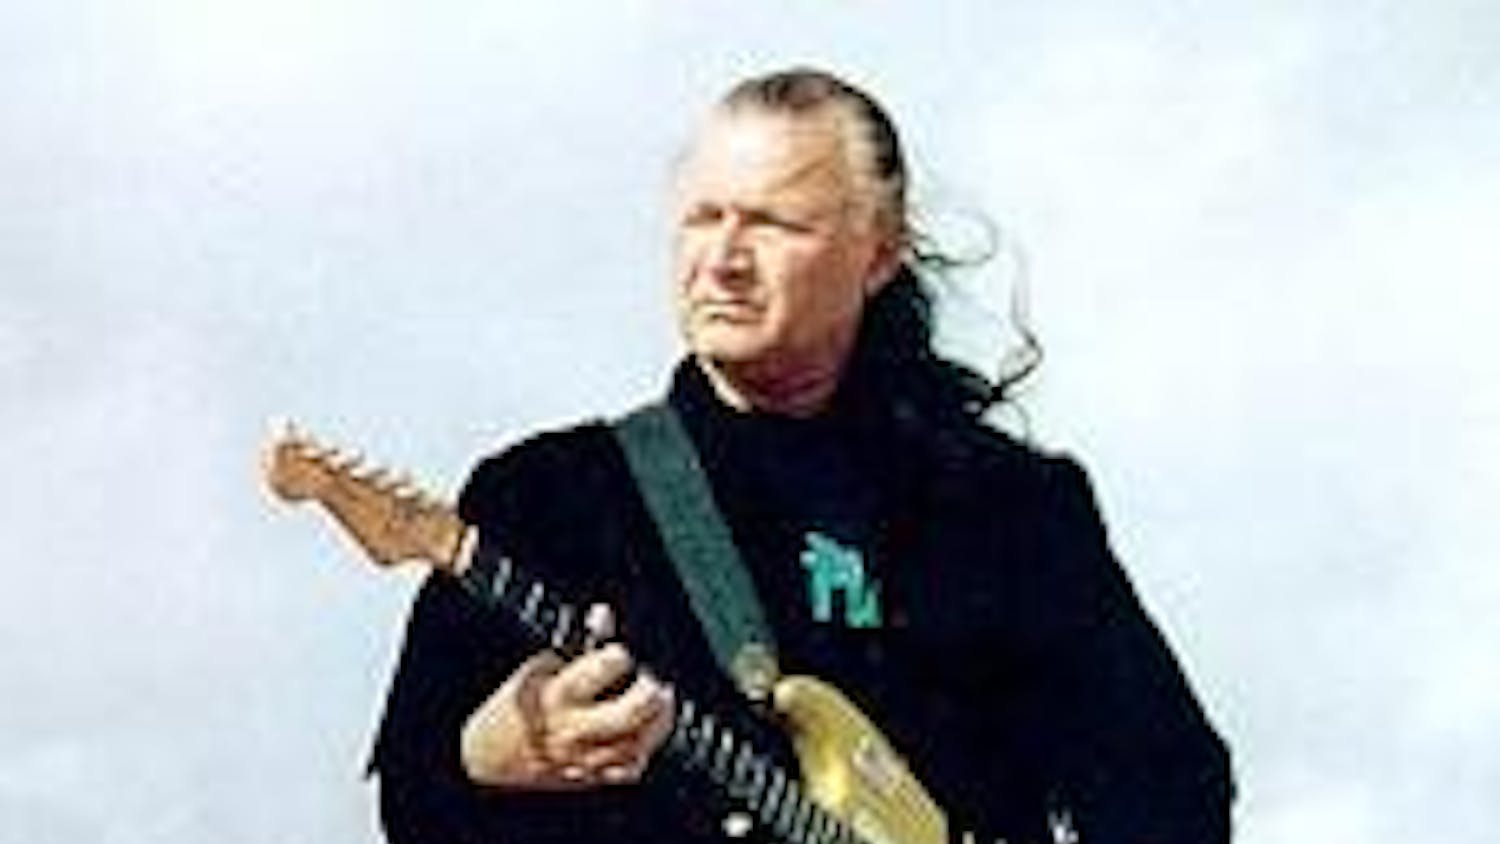 SURF KING - Dick Dale's "Misirlou" captures the essence of the genre he helped to pioneer. A surf reinvention of a Greek folk classic, the exotic riffs inspired everyone from the Beach Boys to Quentin Tarantino. 